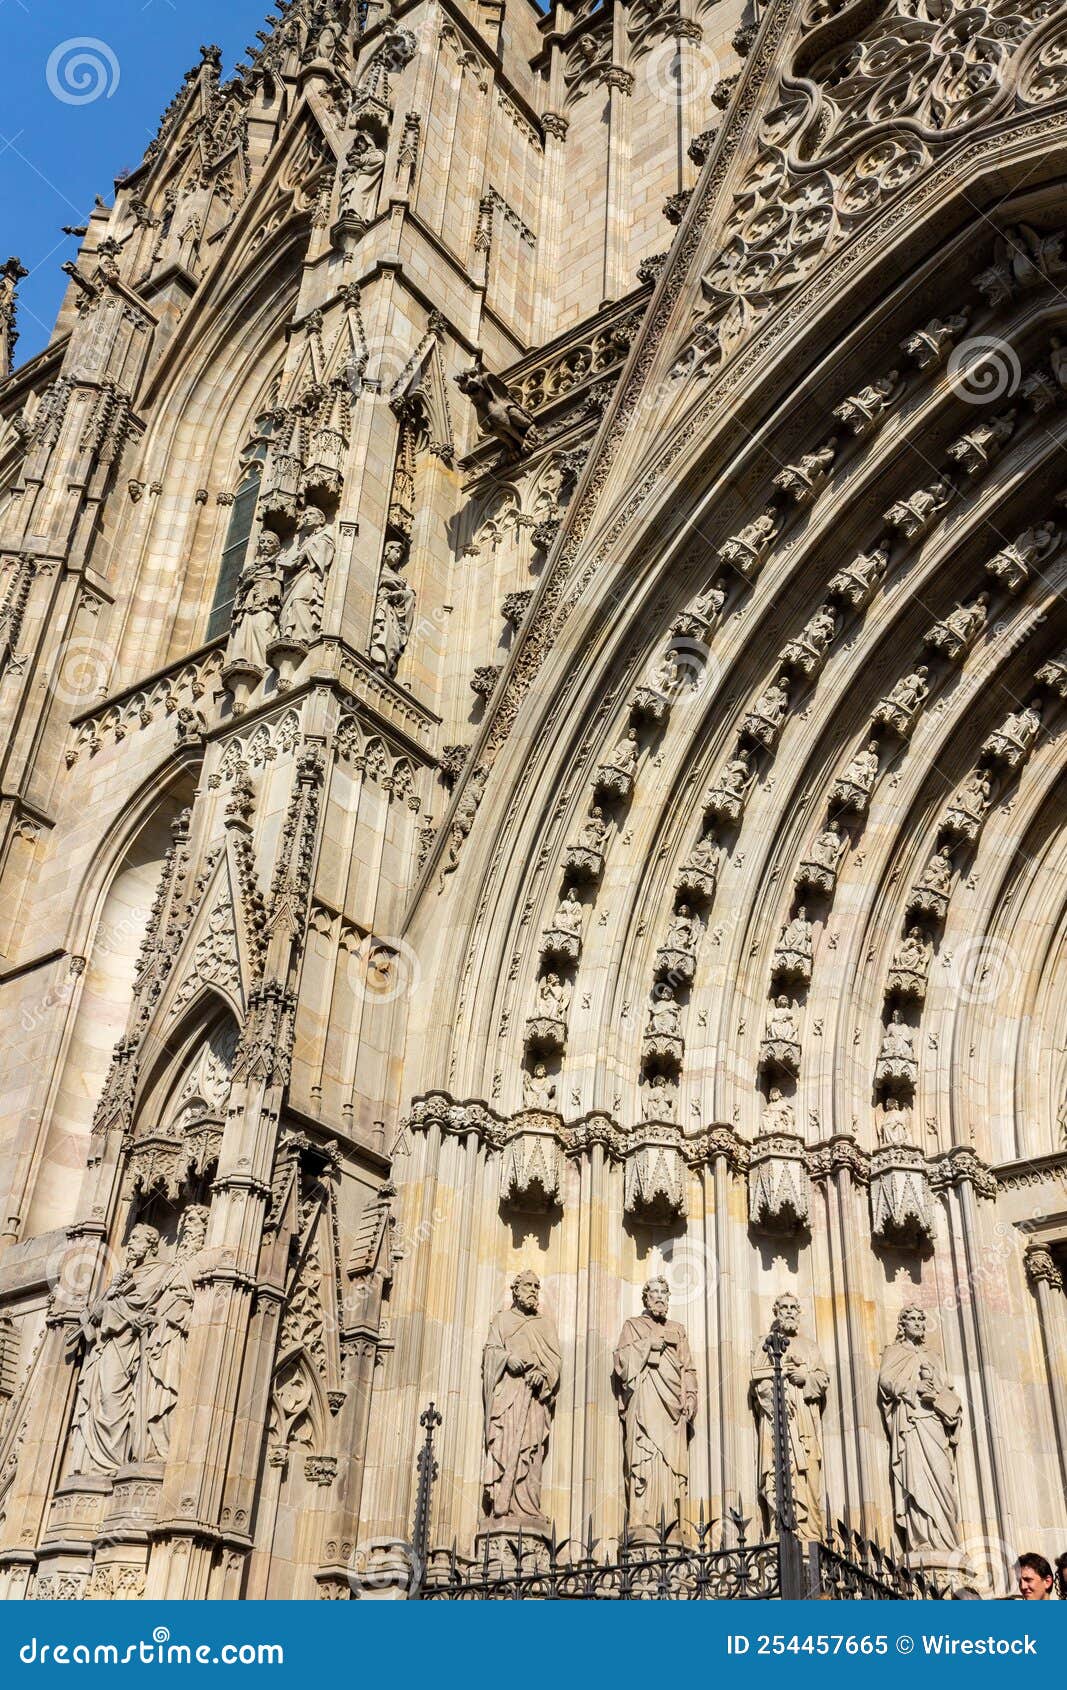 facade of the gothic cathedral in ciutat vella barcelona, spain